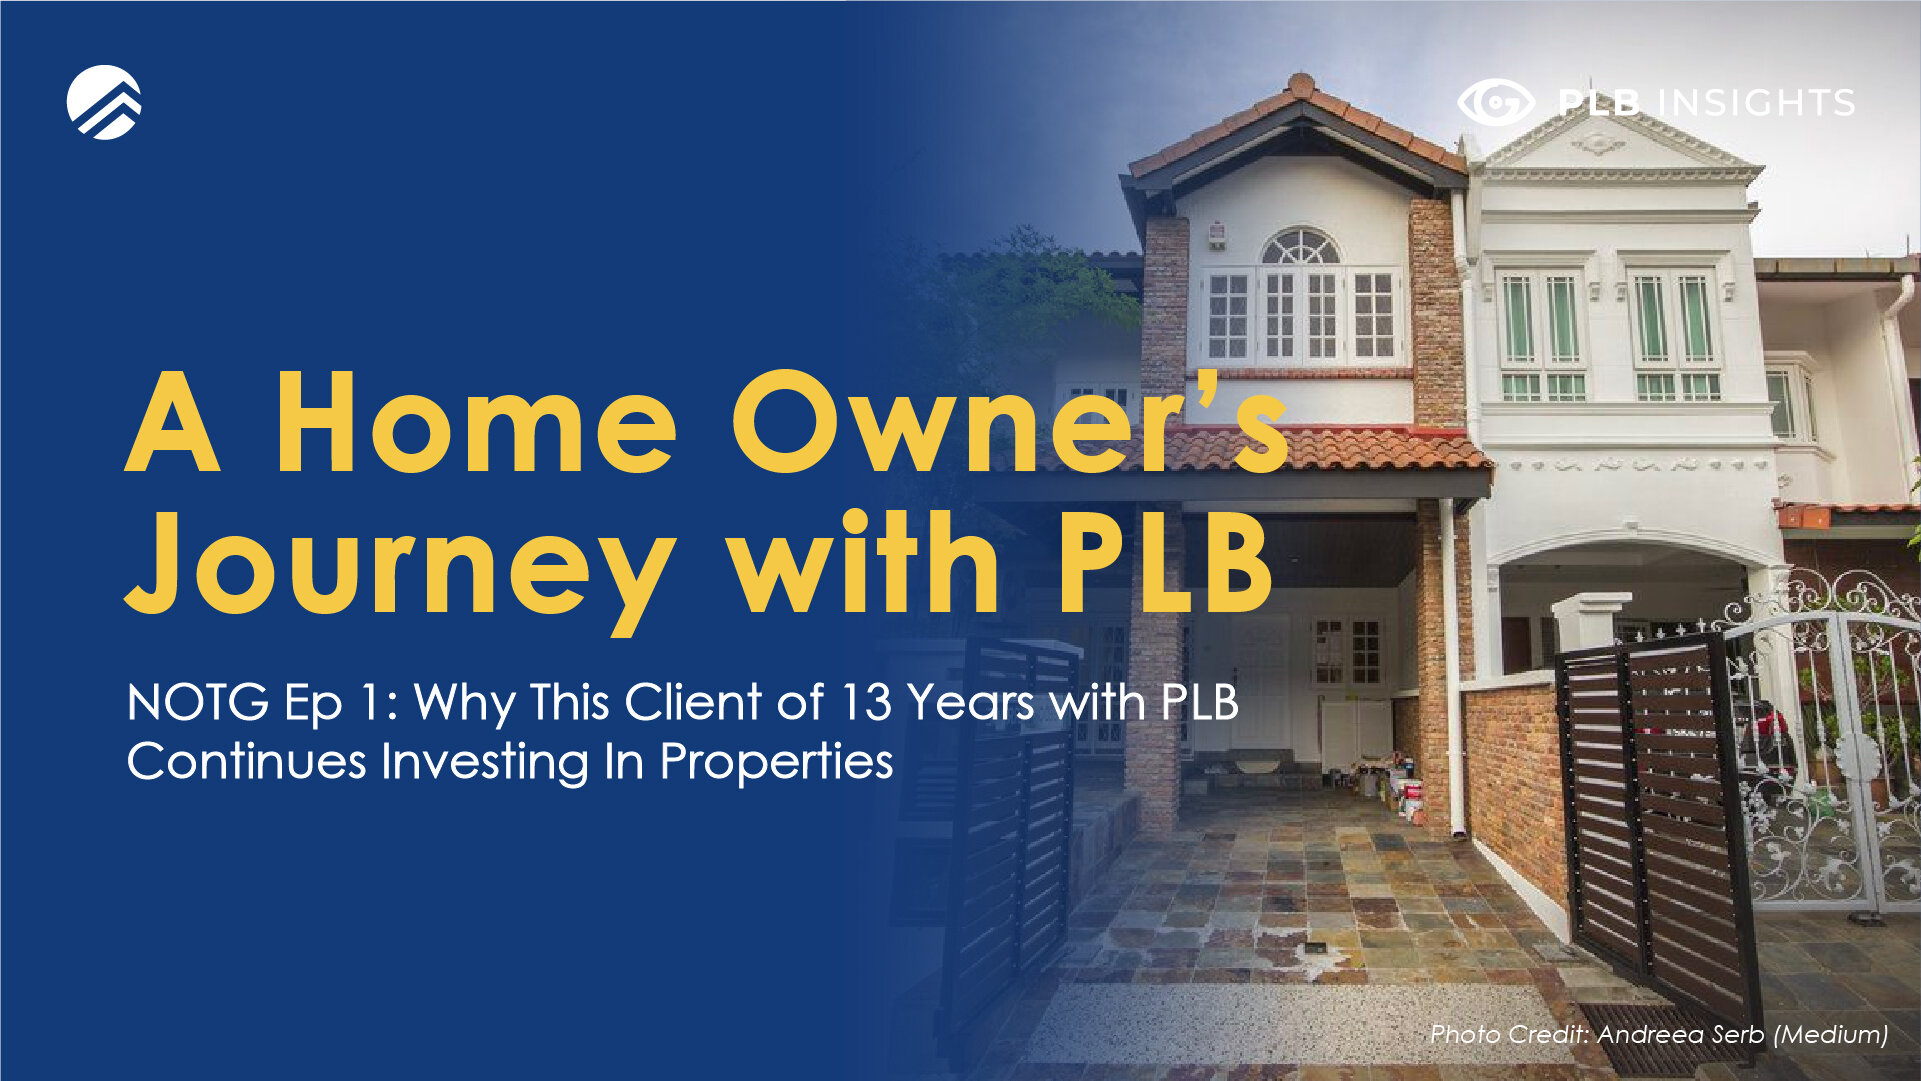 A Home Owner’s Journey with PLB_Article Cover.jpg